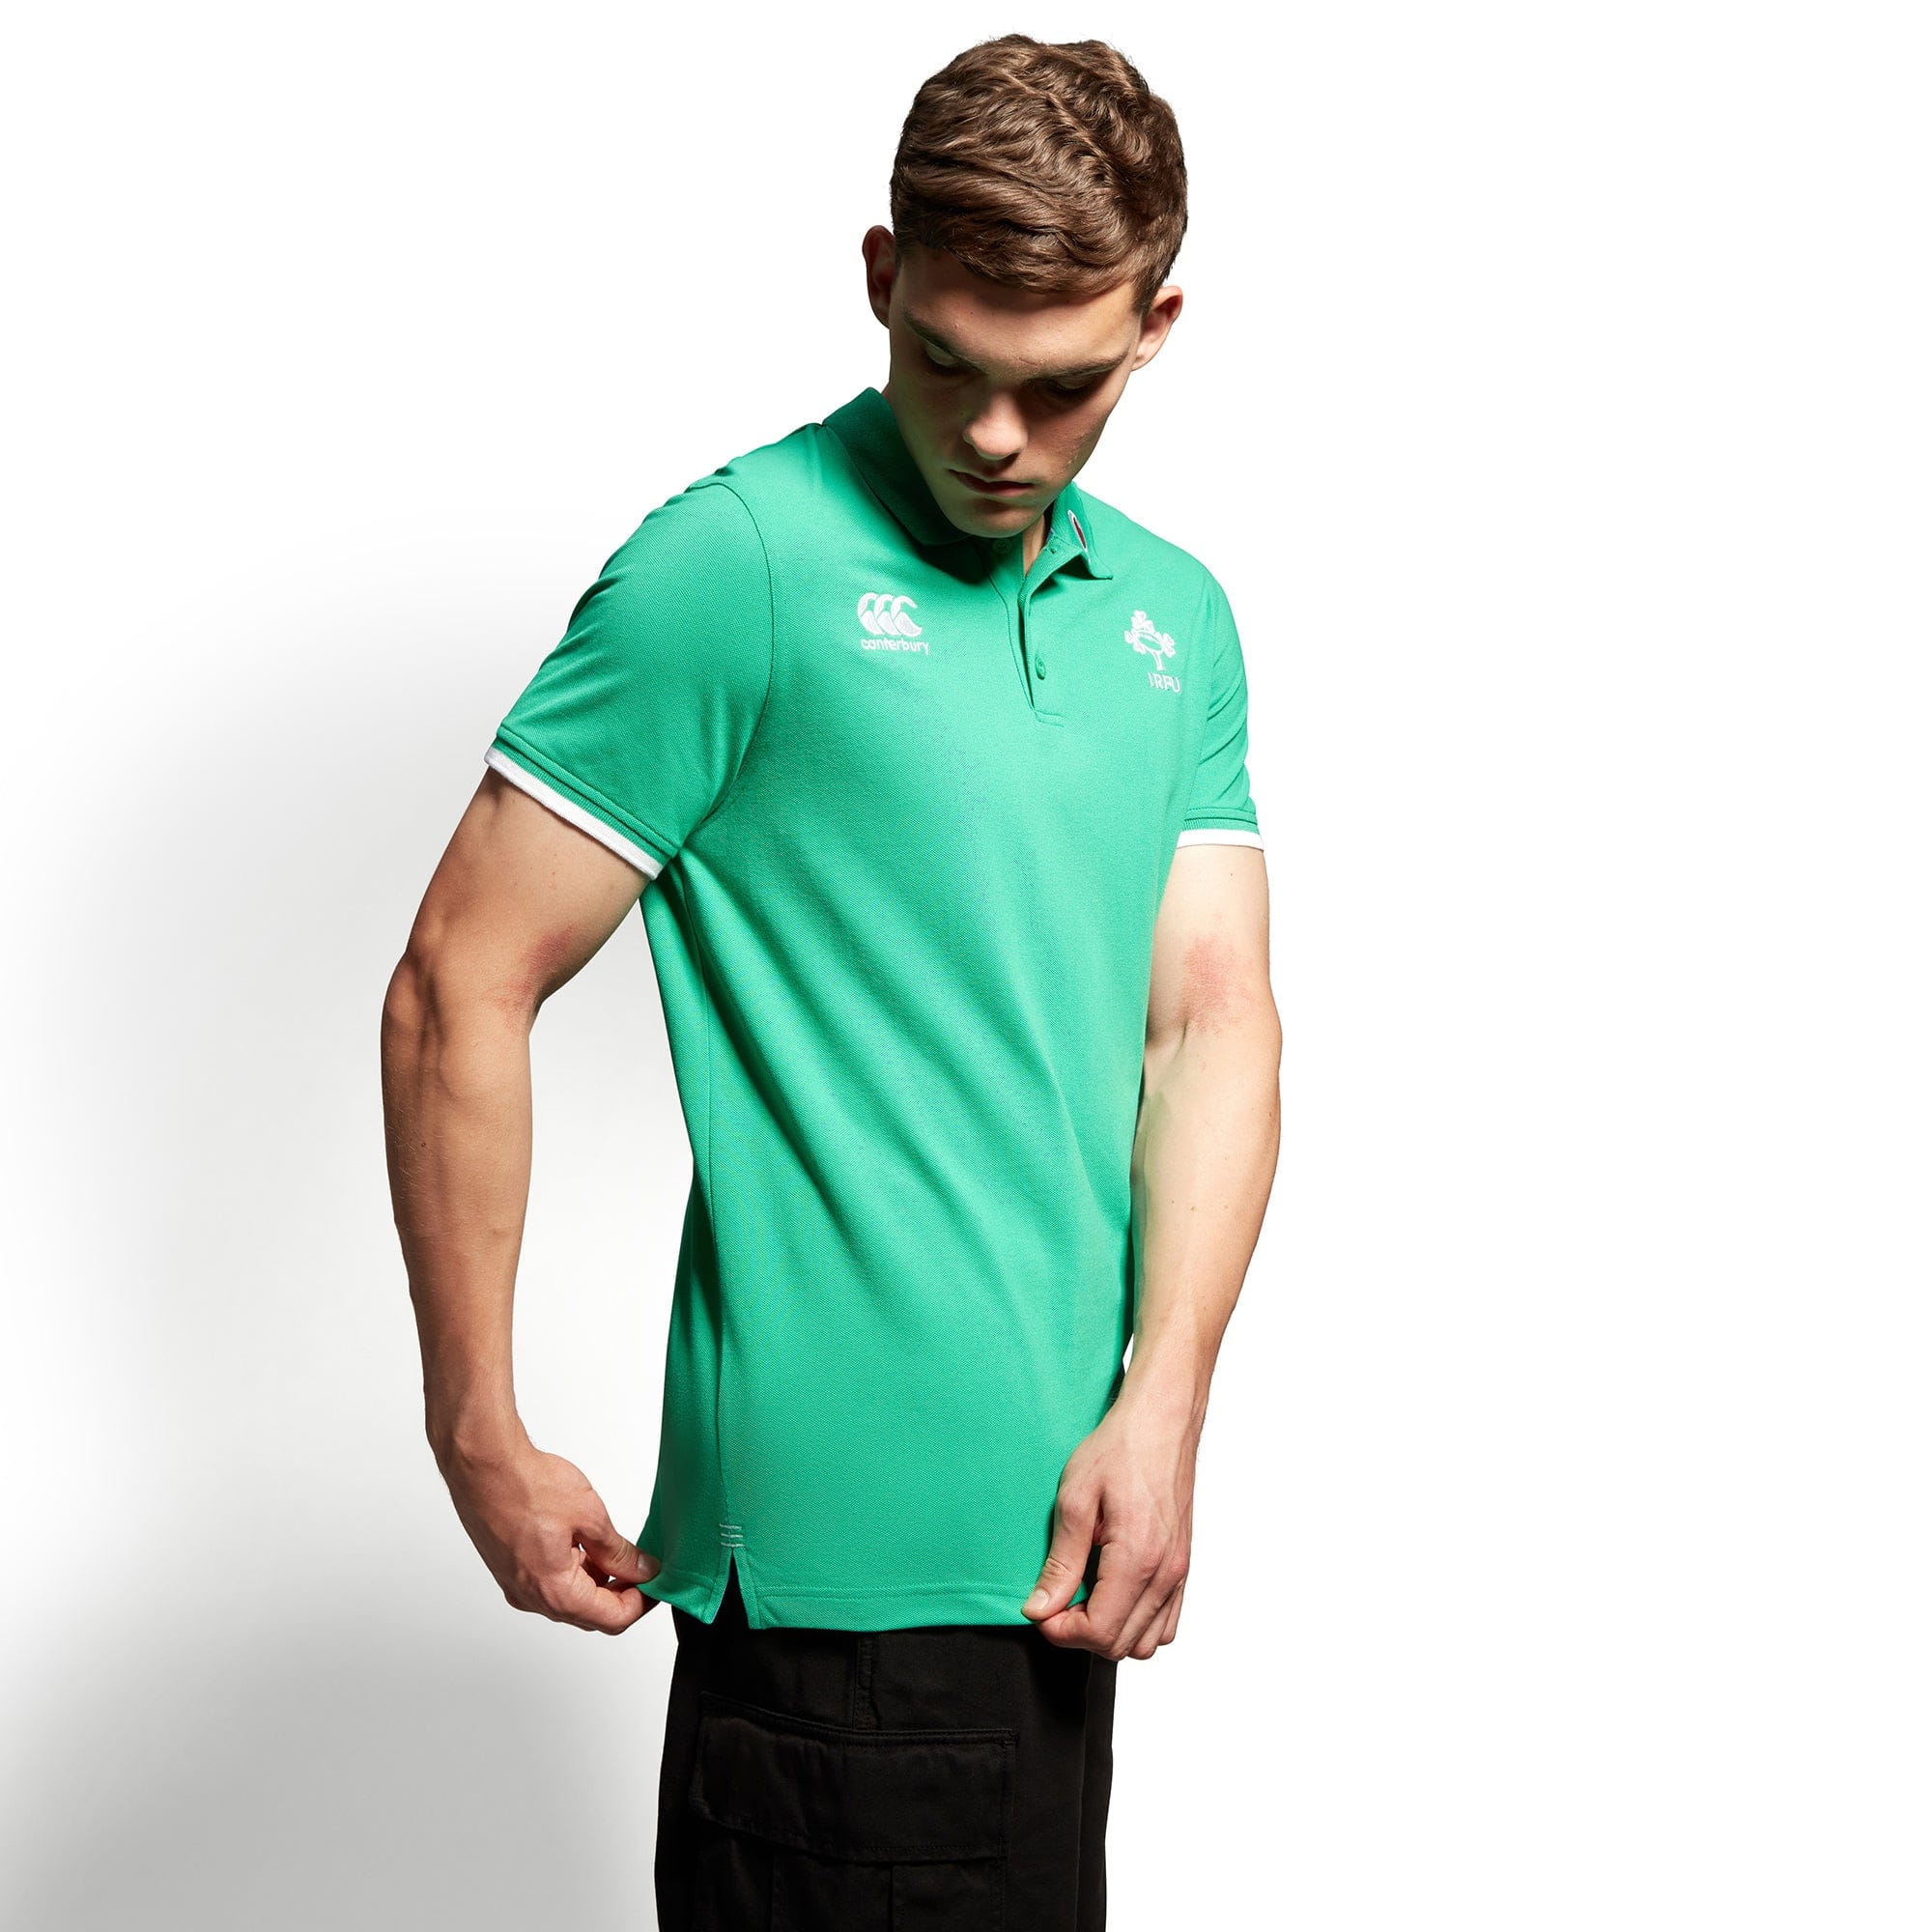 Ireland Rugby World Cup 23 Classic Jersey by Canterbury